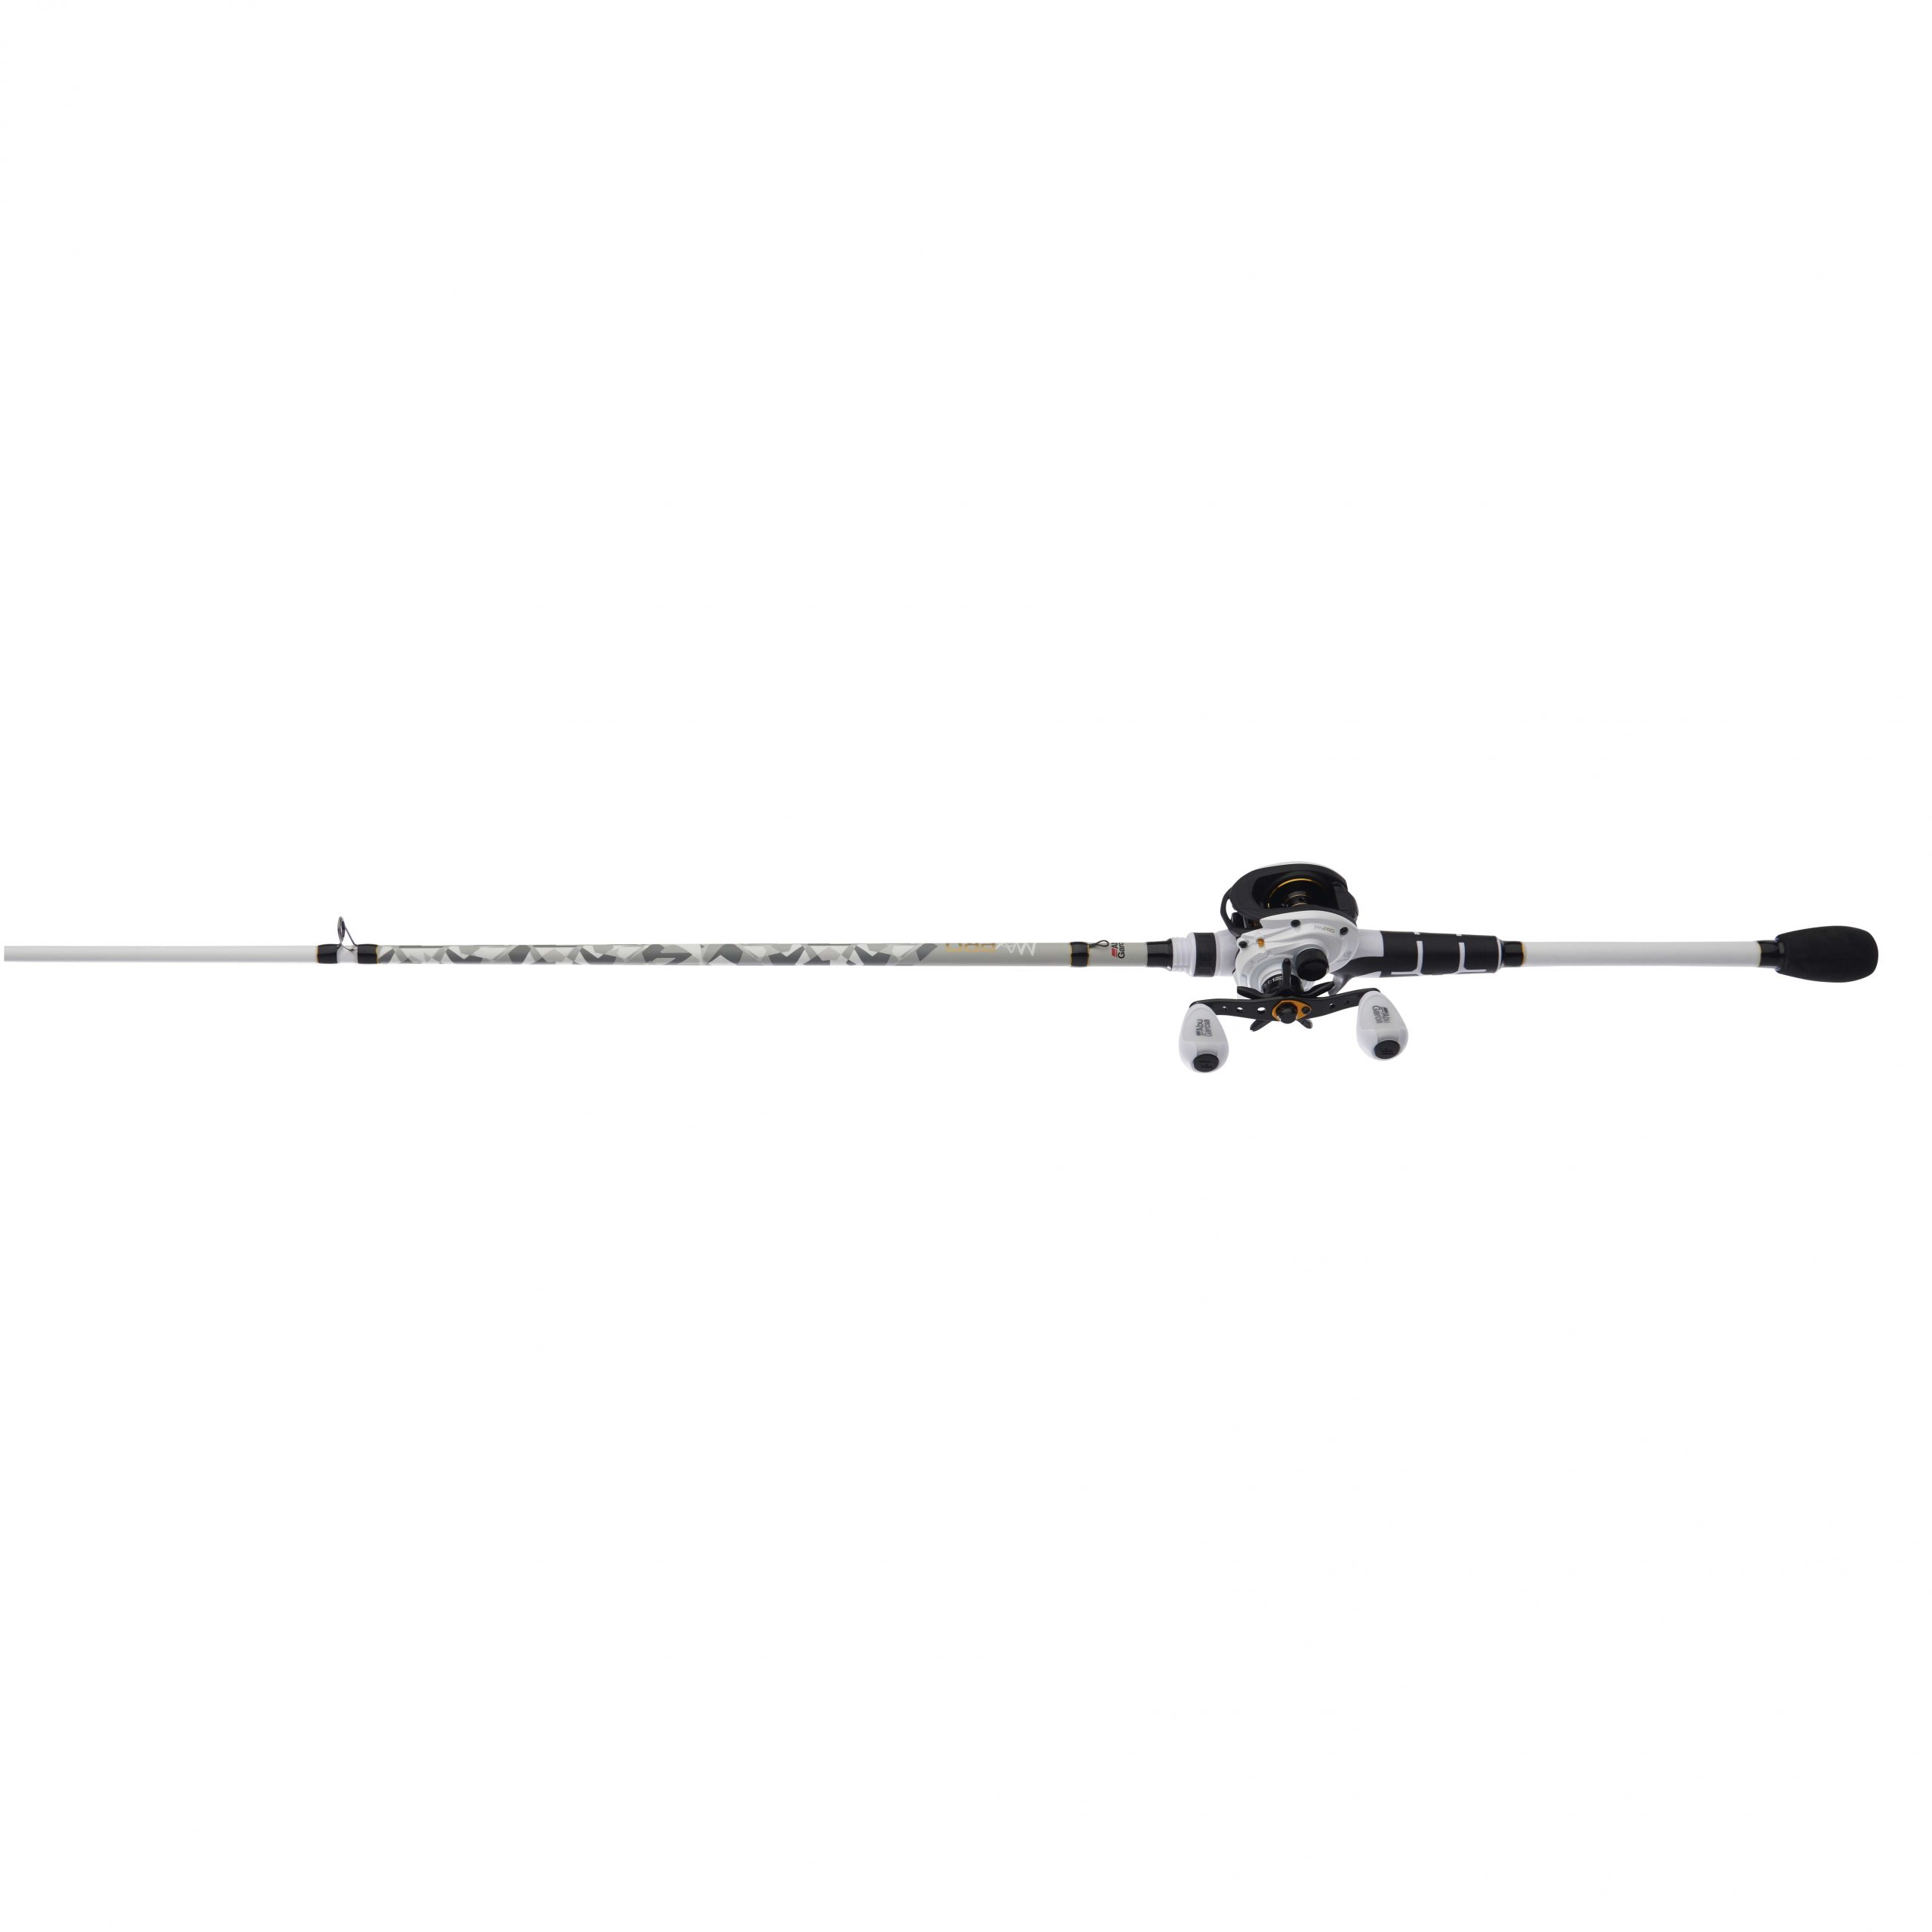 Take a closer look at the all new Abu Garcia Max Pro rod and reel! 